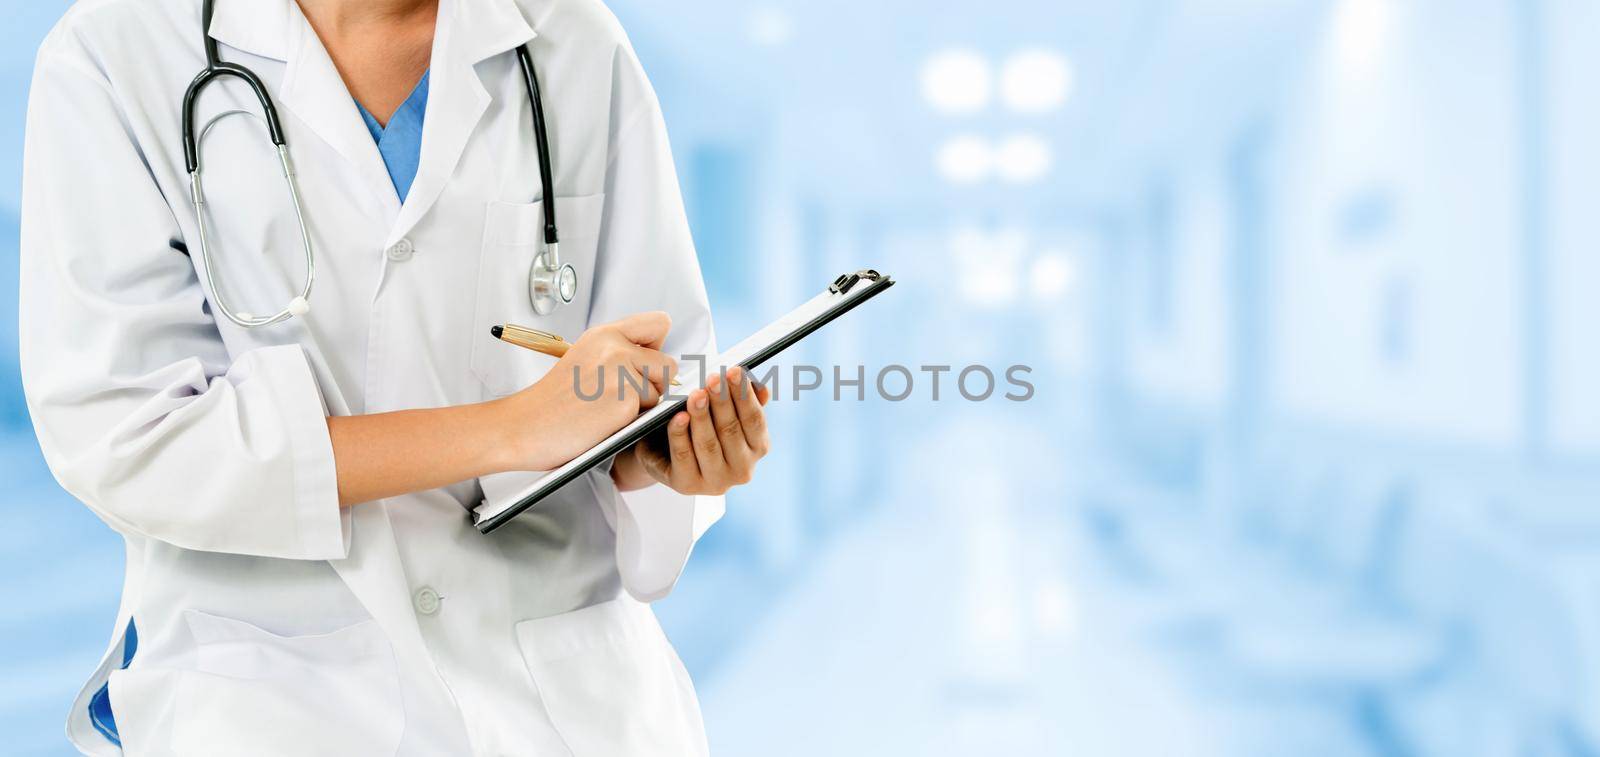 Woman doctor working at the hospital office. Medical healthcare and doctor staff service.